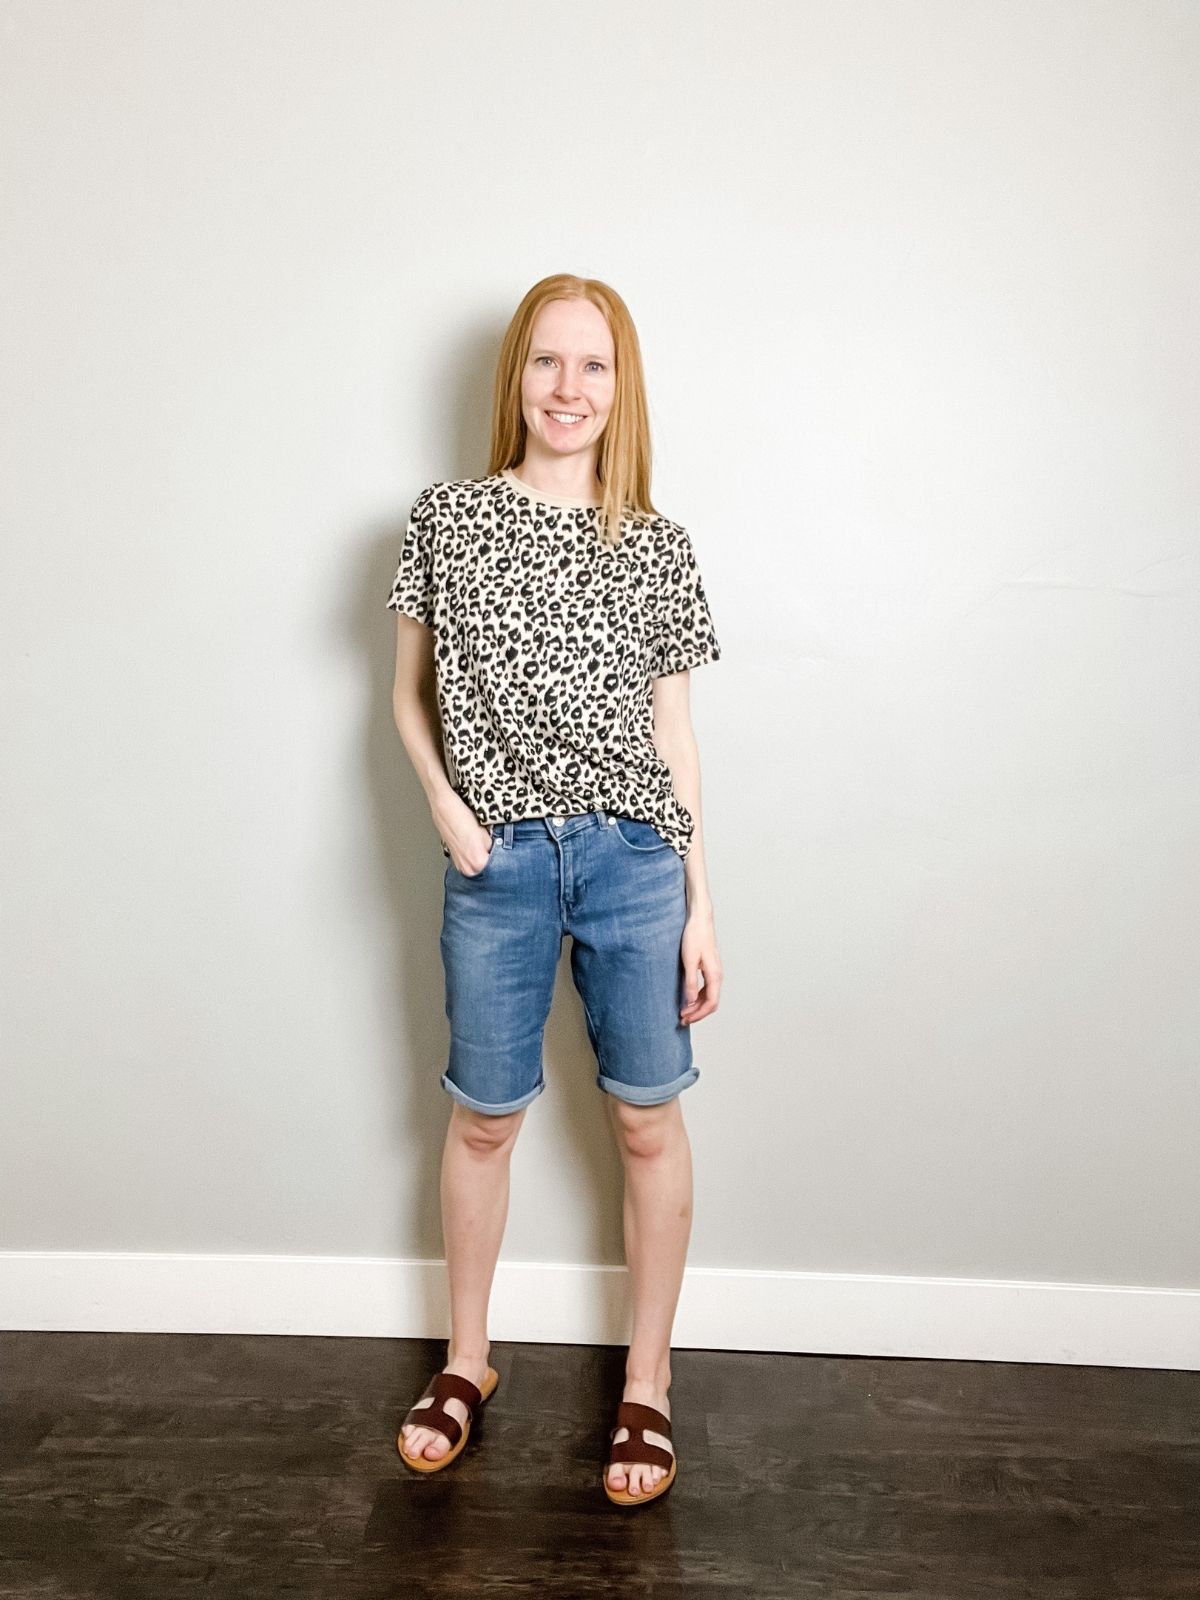 styling denim bermuda shorts with a leopard top